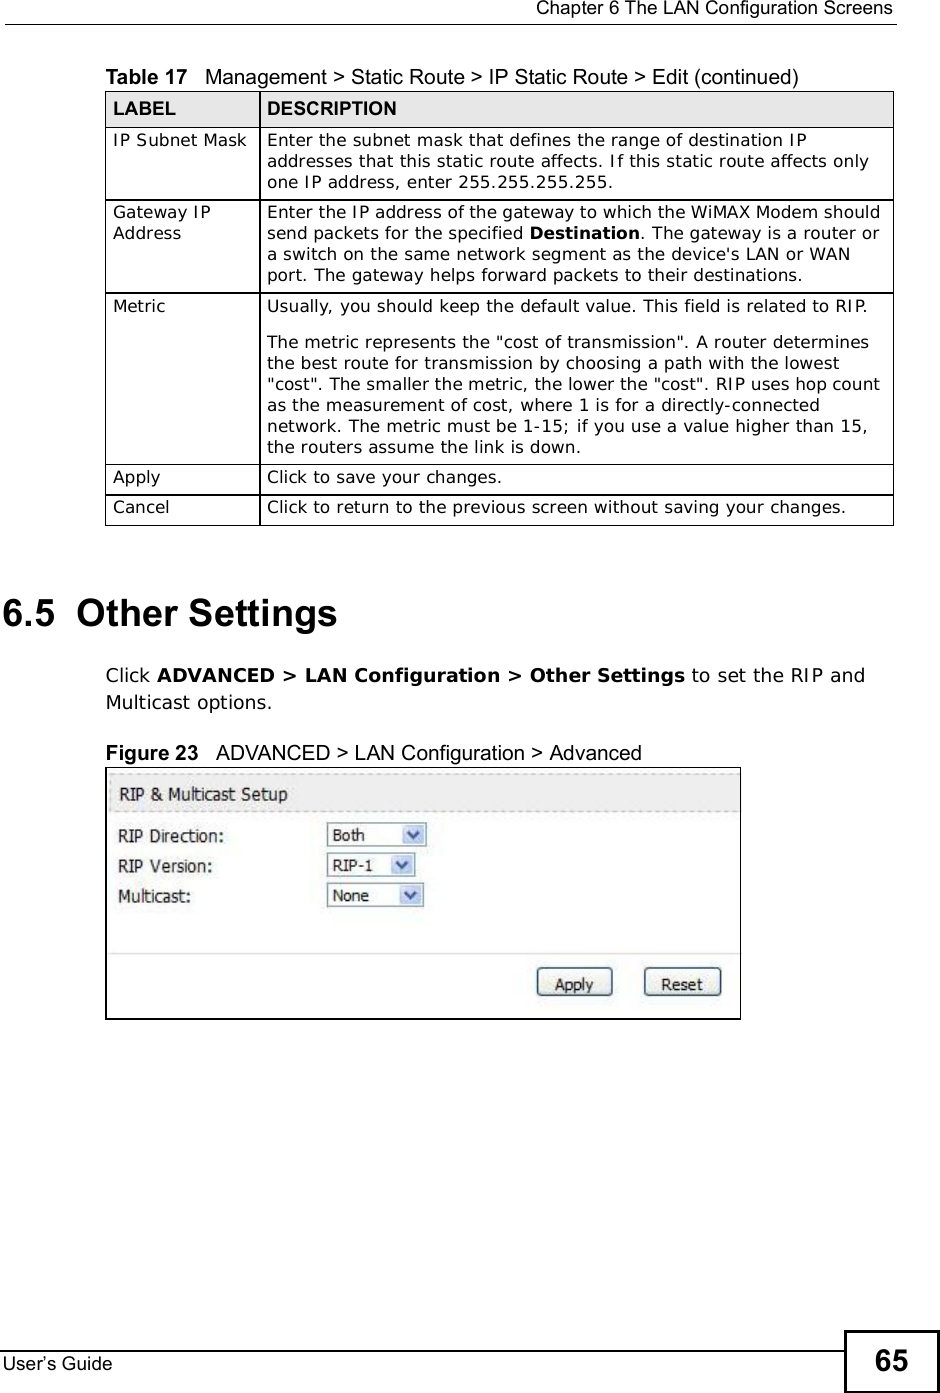  Chapter 6The LAN Configuration ScreensUser s Guide 656.5  Other SettingsClick ADVANCED &gt; LAN Configuration &gt; Other Settings to set the RIP and Multicast options.Figure 23   ADVANCED &gt; LAN Configuration &gt; AdvancedIP Subnet Mask Enter the subnet mask that defines the range of destination IP addresses that this static route affects. If this static route affects only one IP address, enter 255.255.255.255.Gateway IP Address Enter the IP address of the gateway to which the WiMAX Modem should send packets for the specified Destination. The gateway is a router or a switch on the same network segment as the device&apos;s LAN or WAN port. The gateway helps forward packets to their destinations.Metric Usually, you should keep the default value. This field is related to RIP.The metric represents the &quot;cost of transmission&quot;. A router determines the best route for transmission by choosing a path with the lowest &quot;cost&quot;. The smaller the metric, the lower the &quot;cost&quot;. RIP uses hop count as the measurement of cost, where 1 is for a directly-connected network. The metric must be 1-15; if you use a value higher than 15, the routers assume the link is down.Apply Click to save your changes.Cancel Click to return to the previous screen without saving your changes.Table 17   Management &gt; Static Route &gt; IP Static Route &gt; Edit (continued)LABEL DESCRIPTION